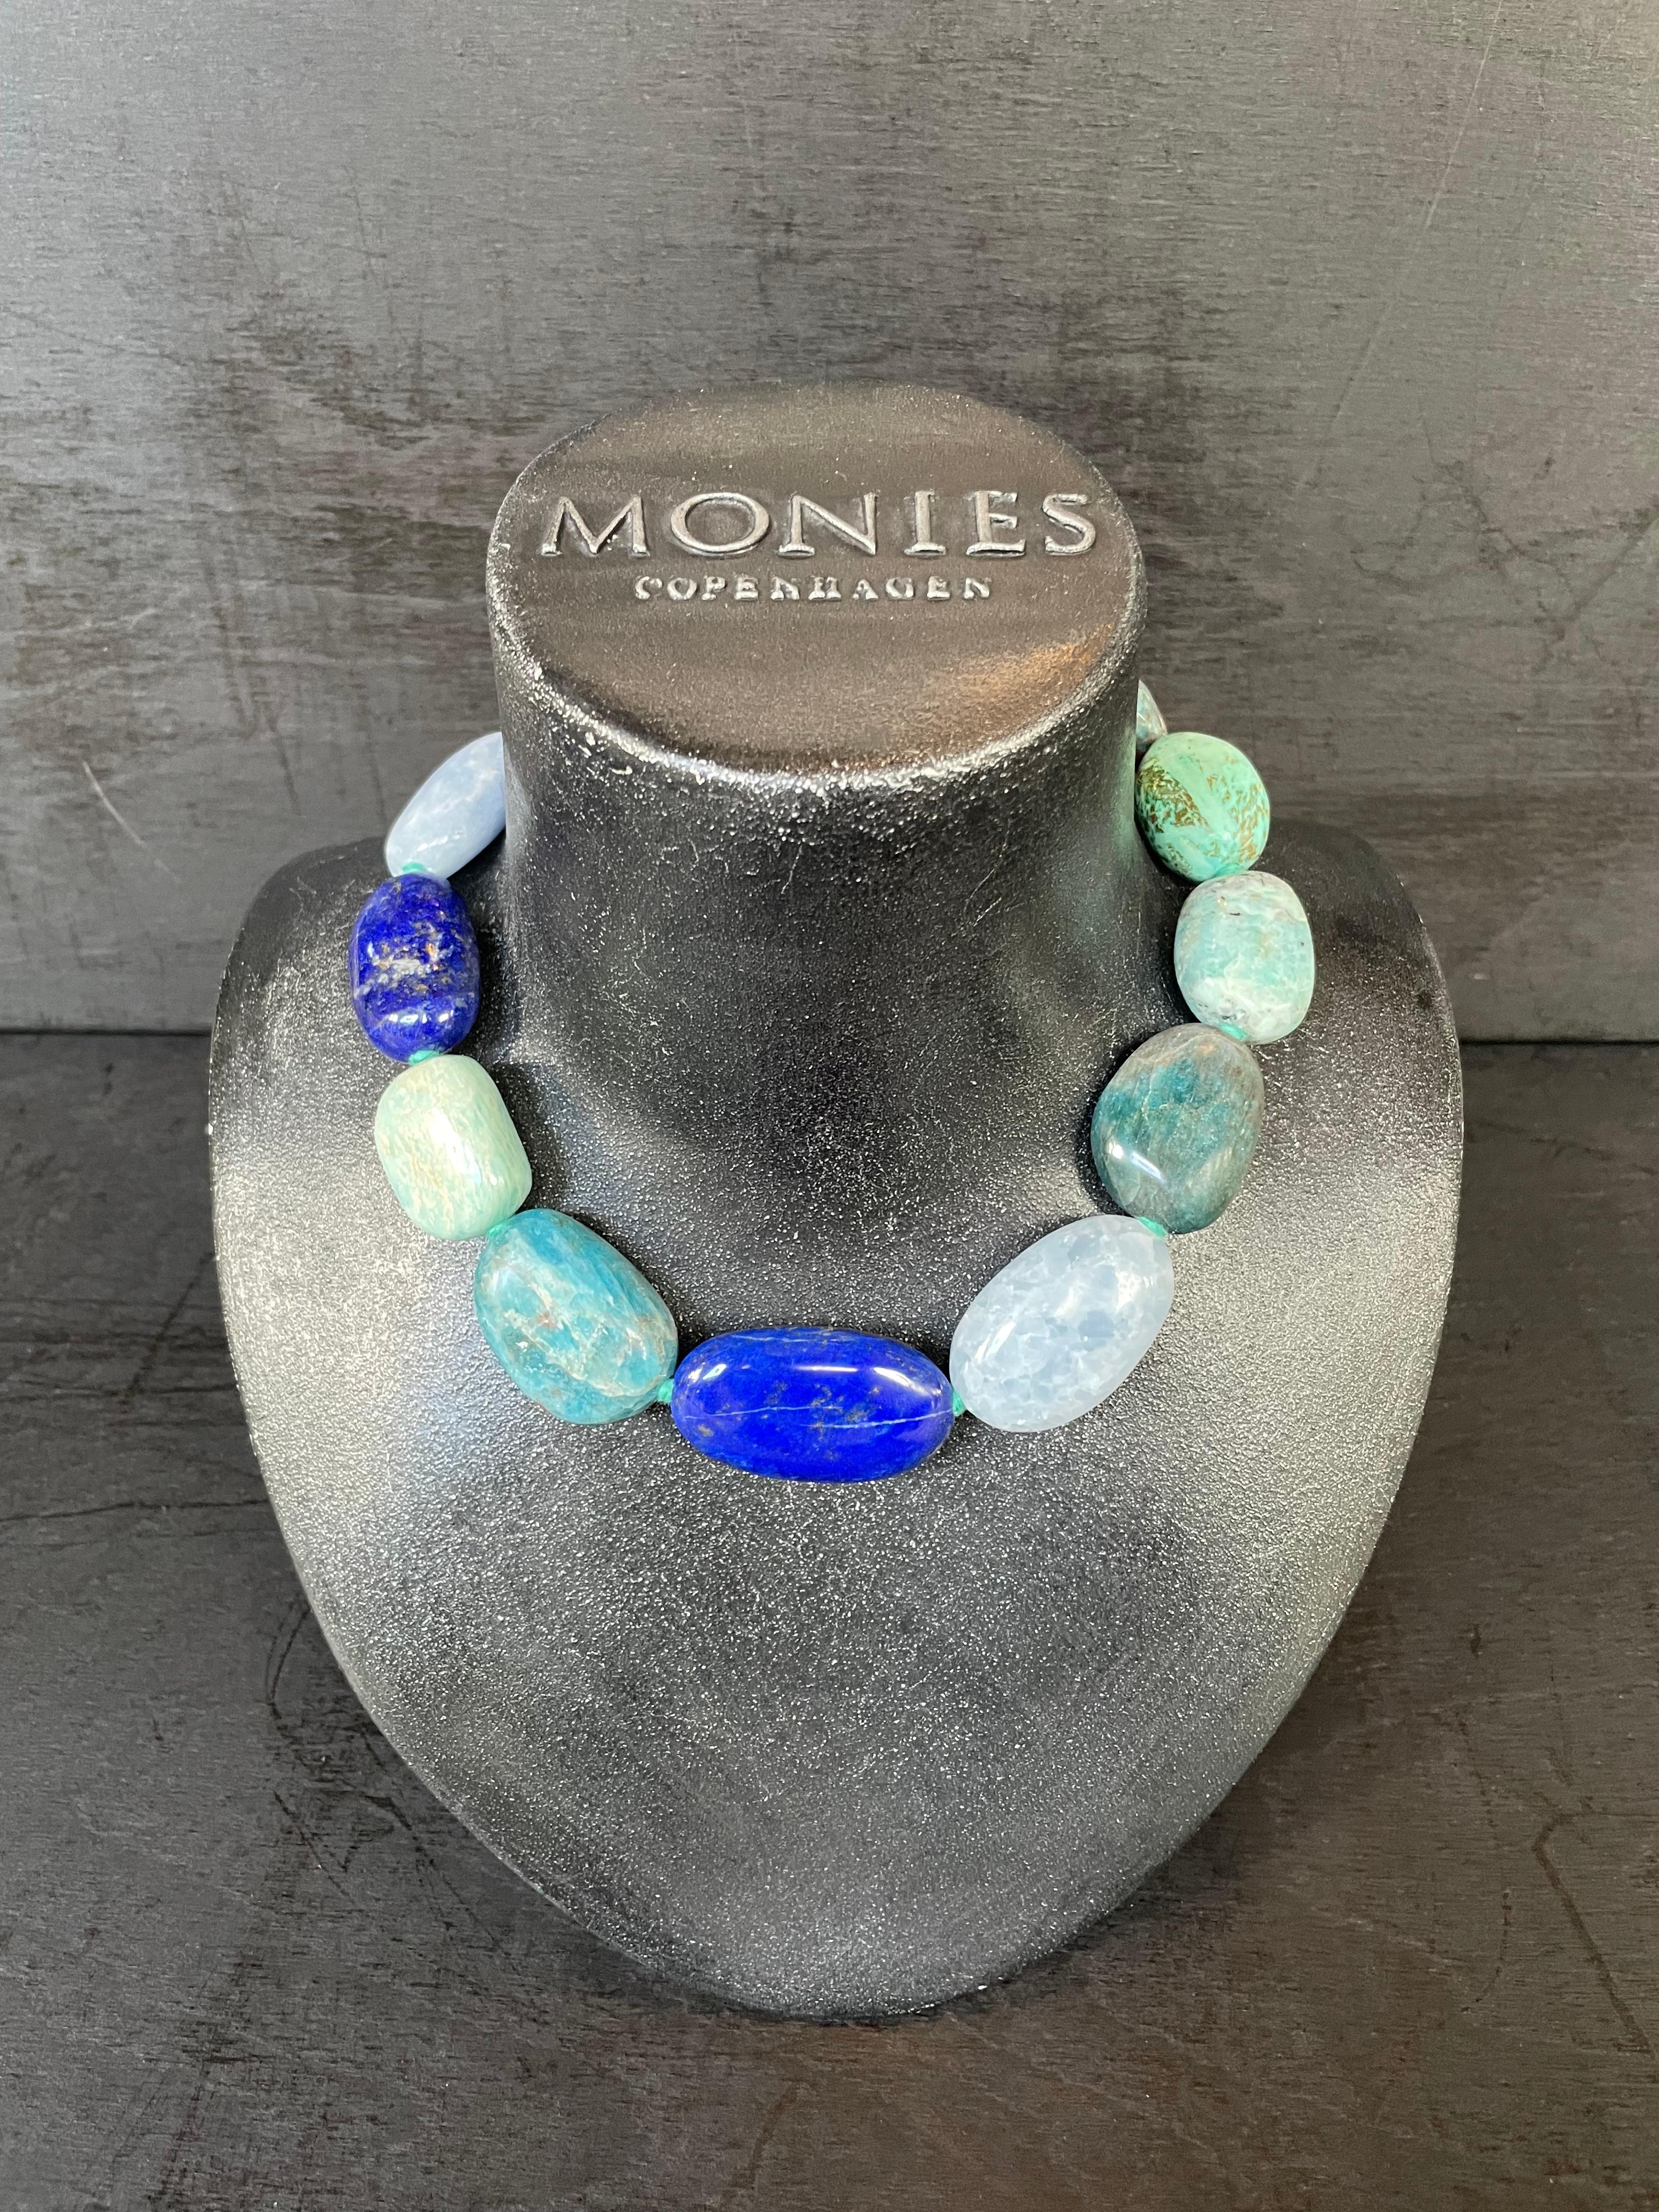 One-of-a-kind statement necklace from the Danish jewellery brand, Monies. 
Made in Celestine, Apatite, Turquoise & Lapis Lazuli with a leather clasp.

Handcrafted in the Monies Atelier in Copenhagen.